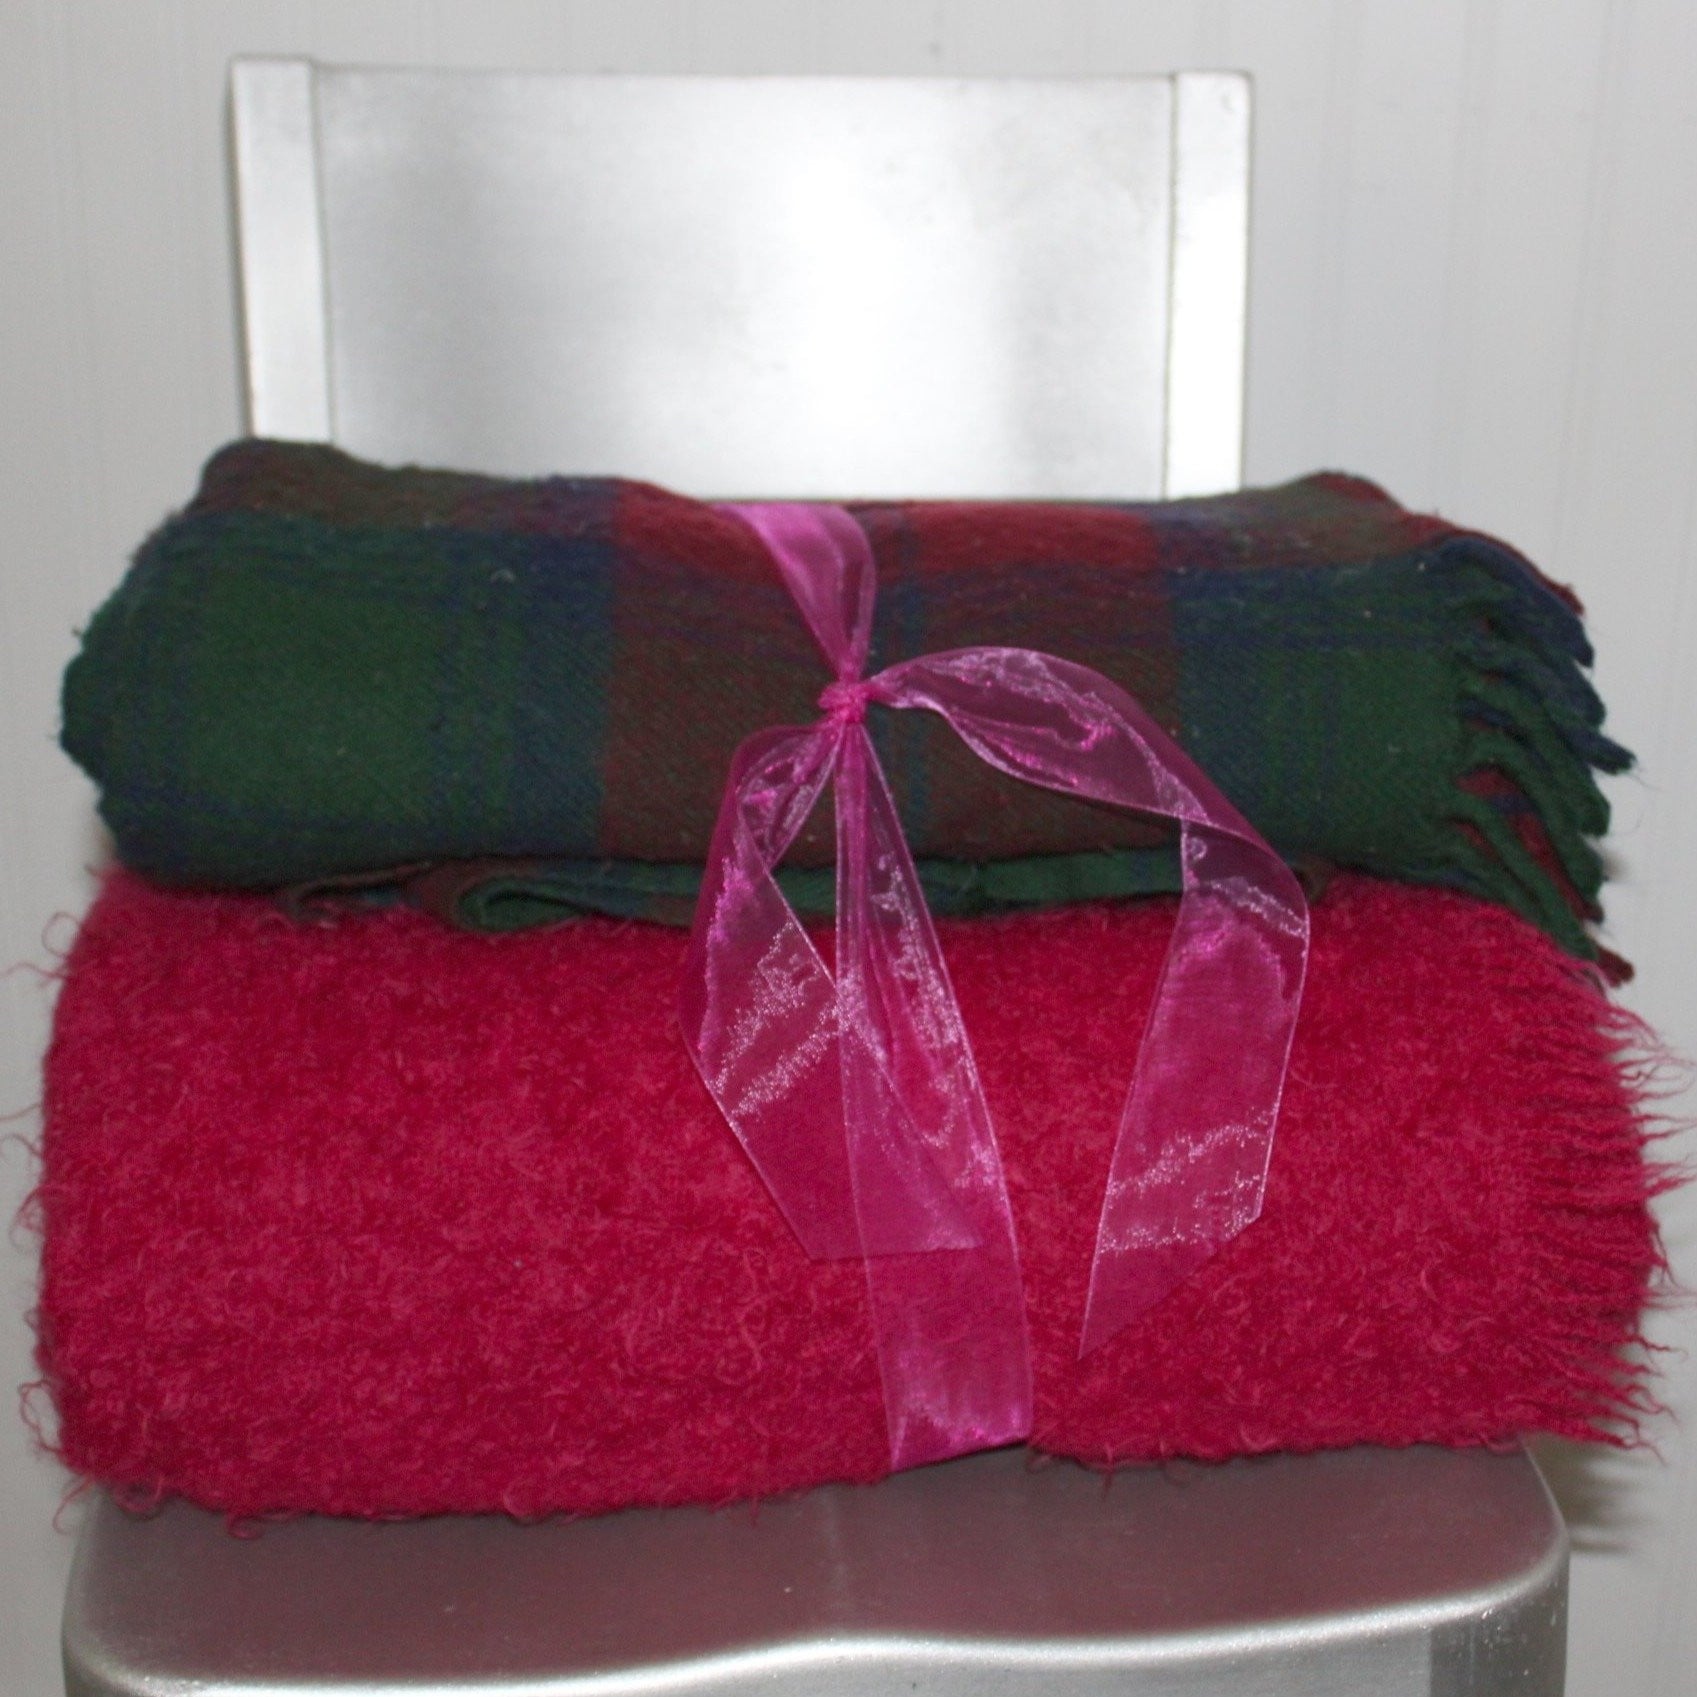 Special 2 Blankets Mohair Fuchsia Wool Plaid Purple Teal Use or DIY Project